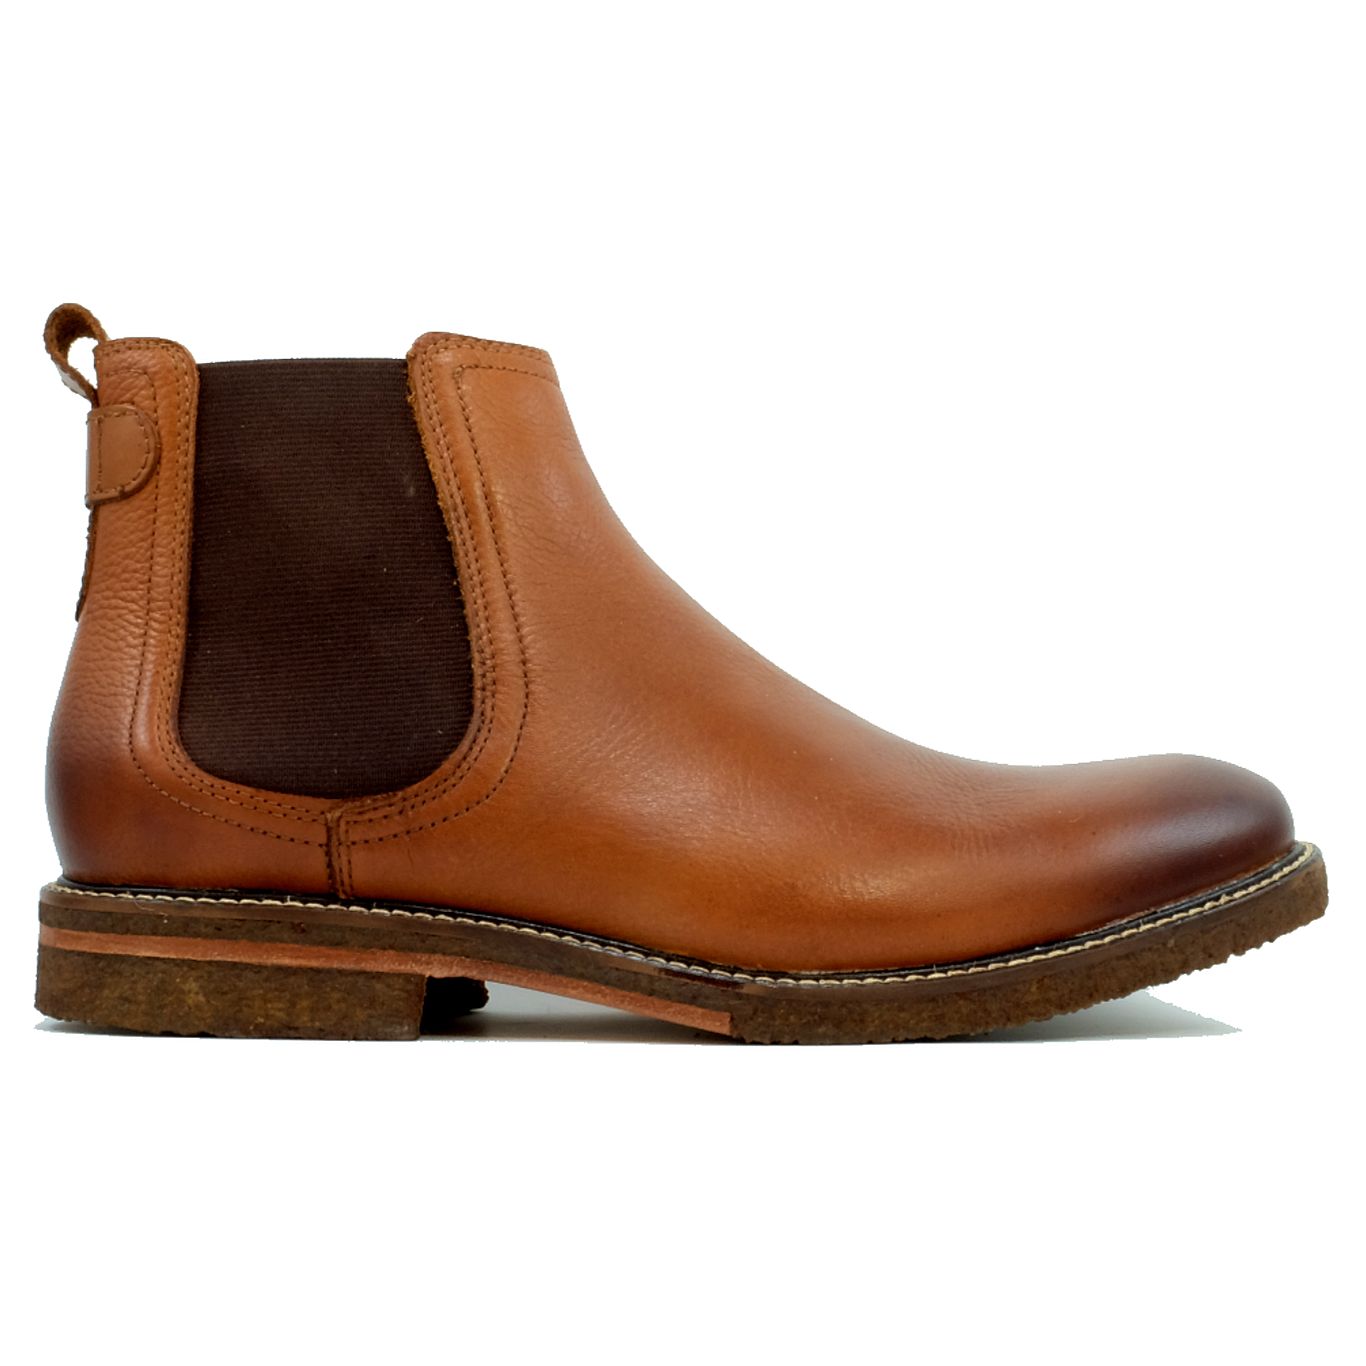 Colton Burnished Calfskin Chelsea Boot in Mahogany by Alan Payne Footwear